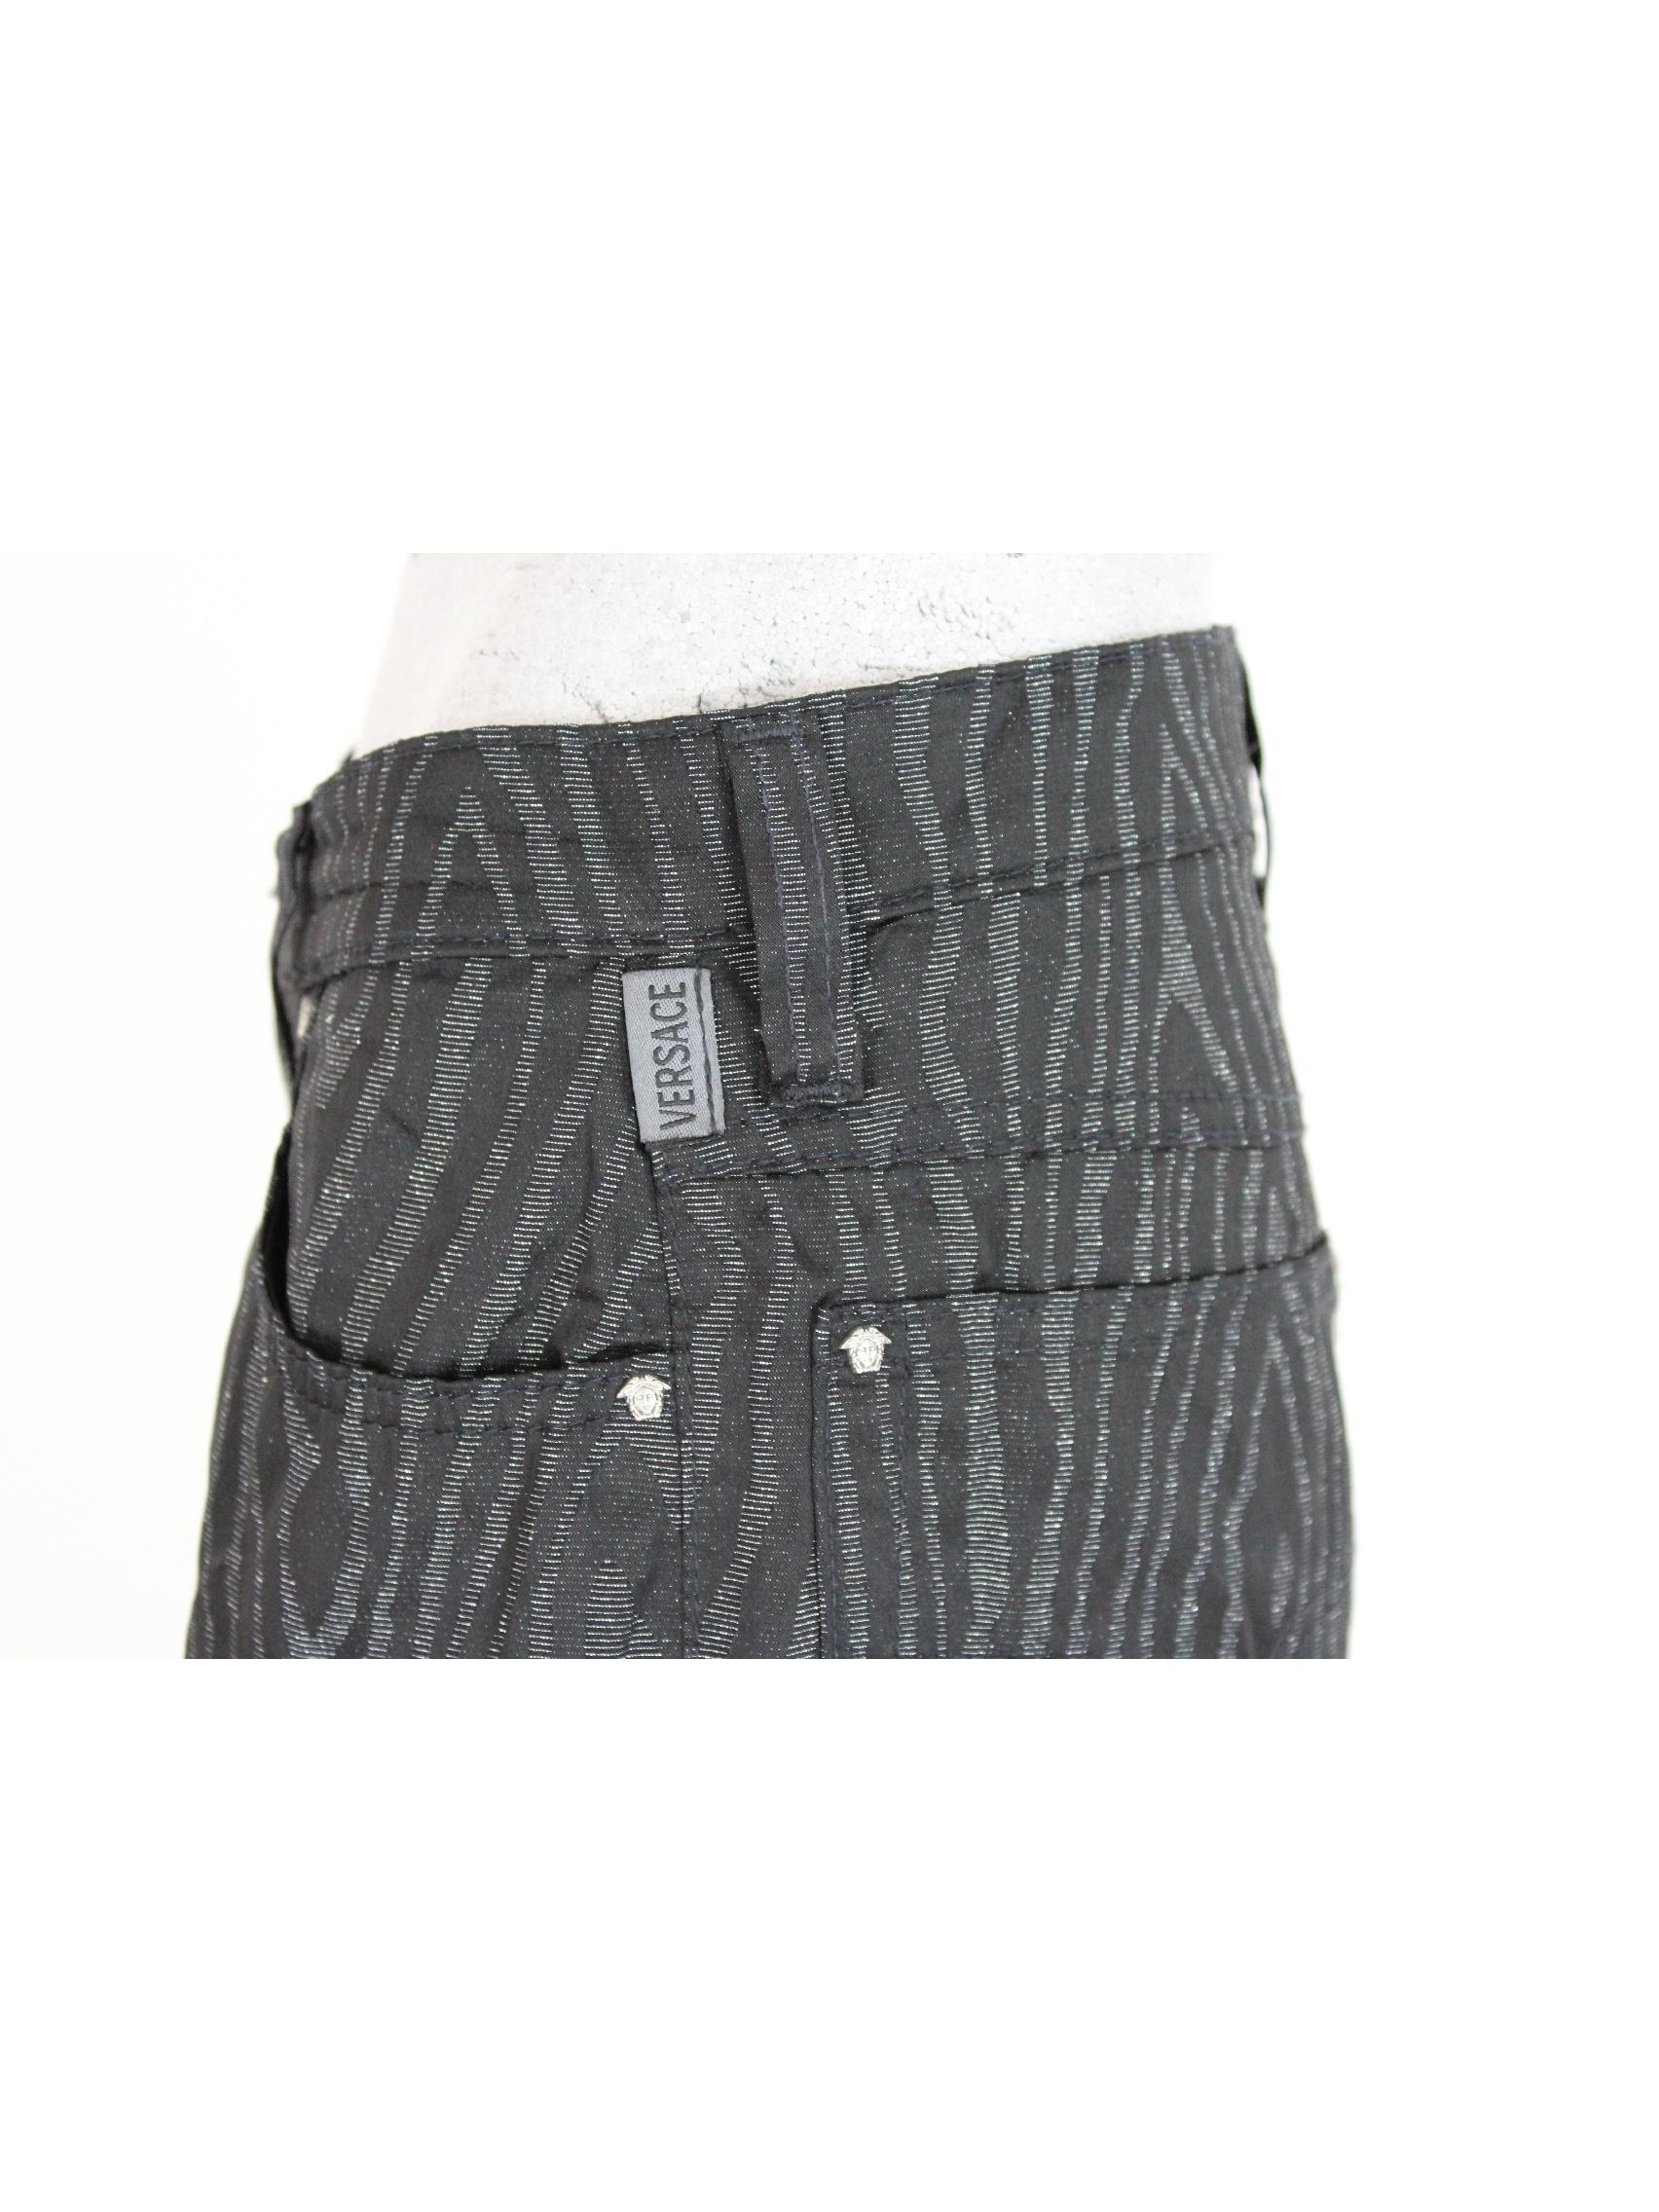 Gianni Versace Black Gray Pinstripe Spotted Lurex Trousers 4